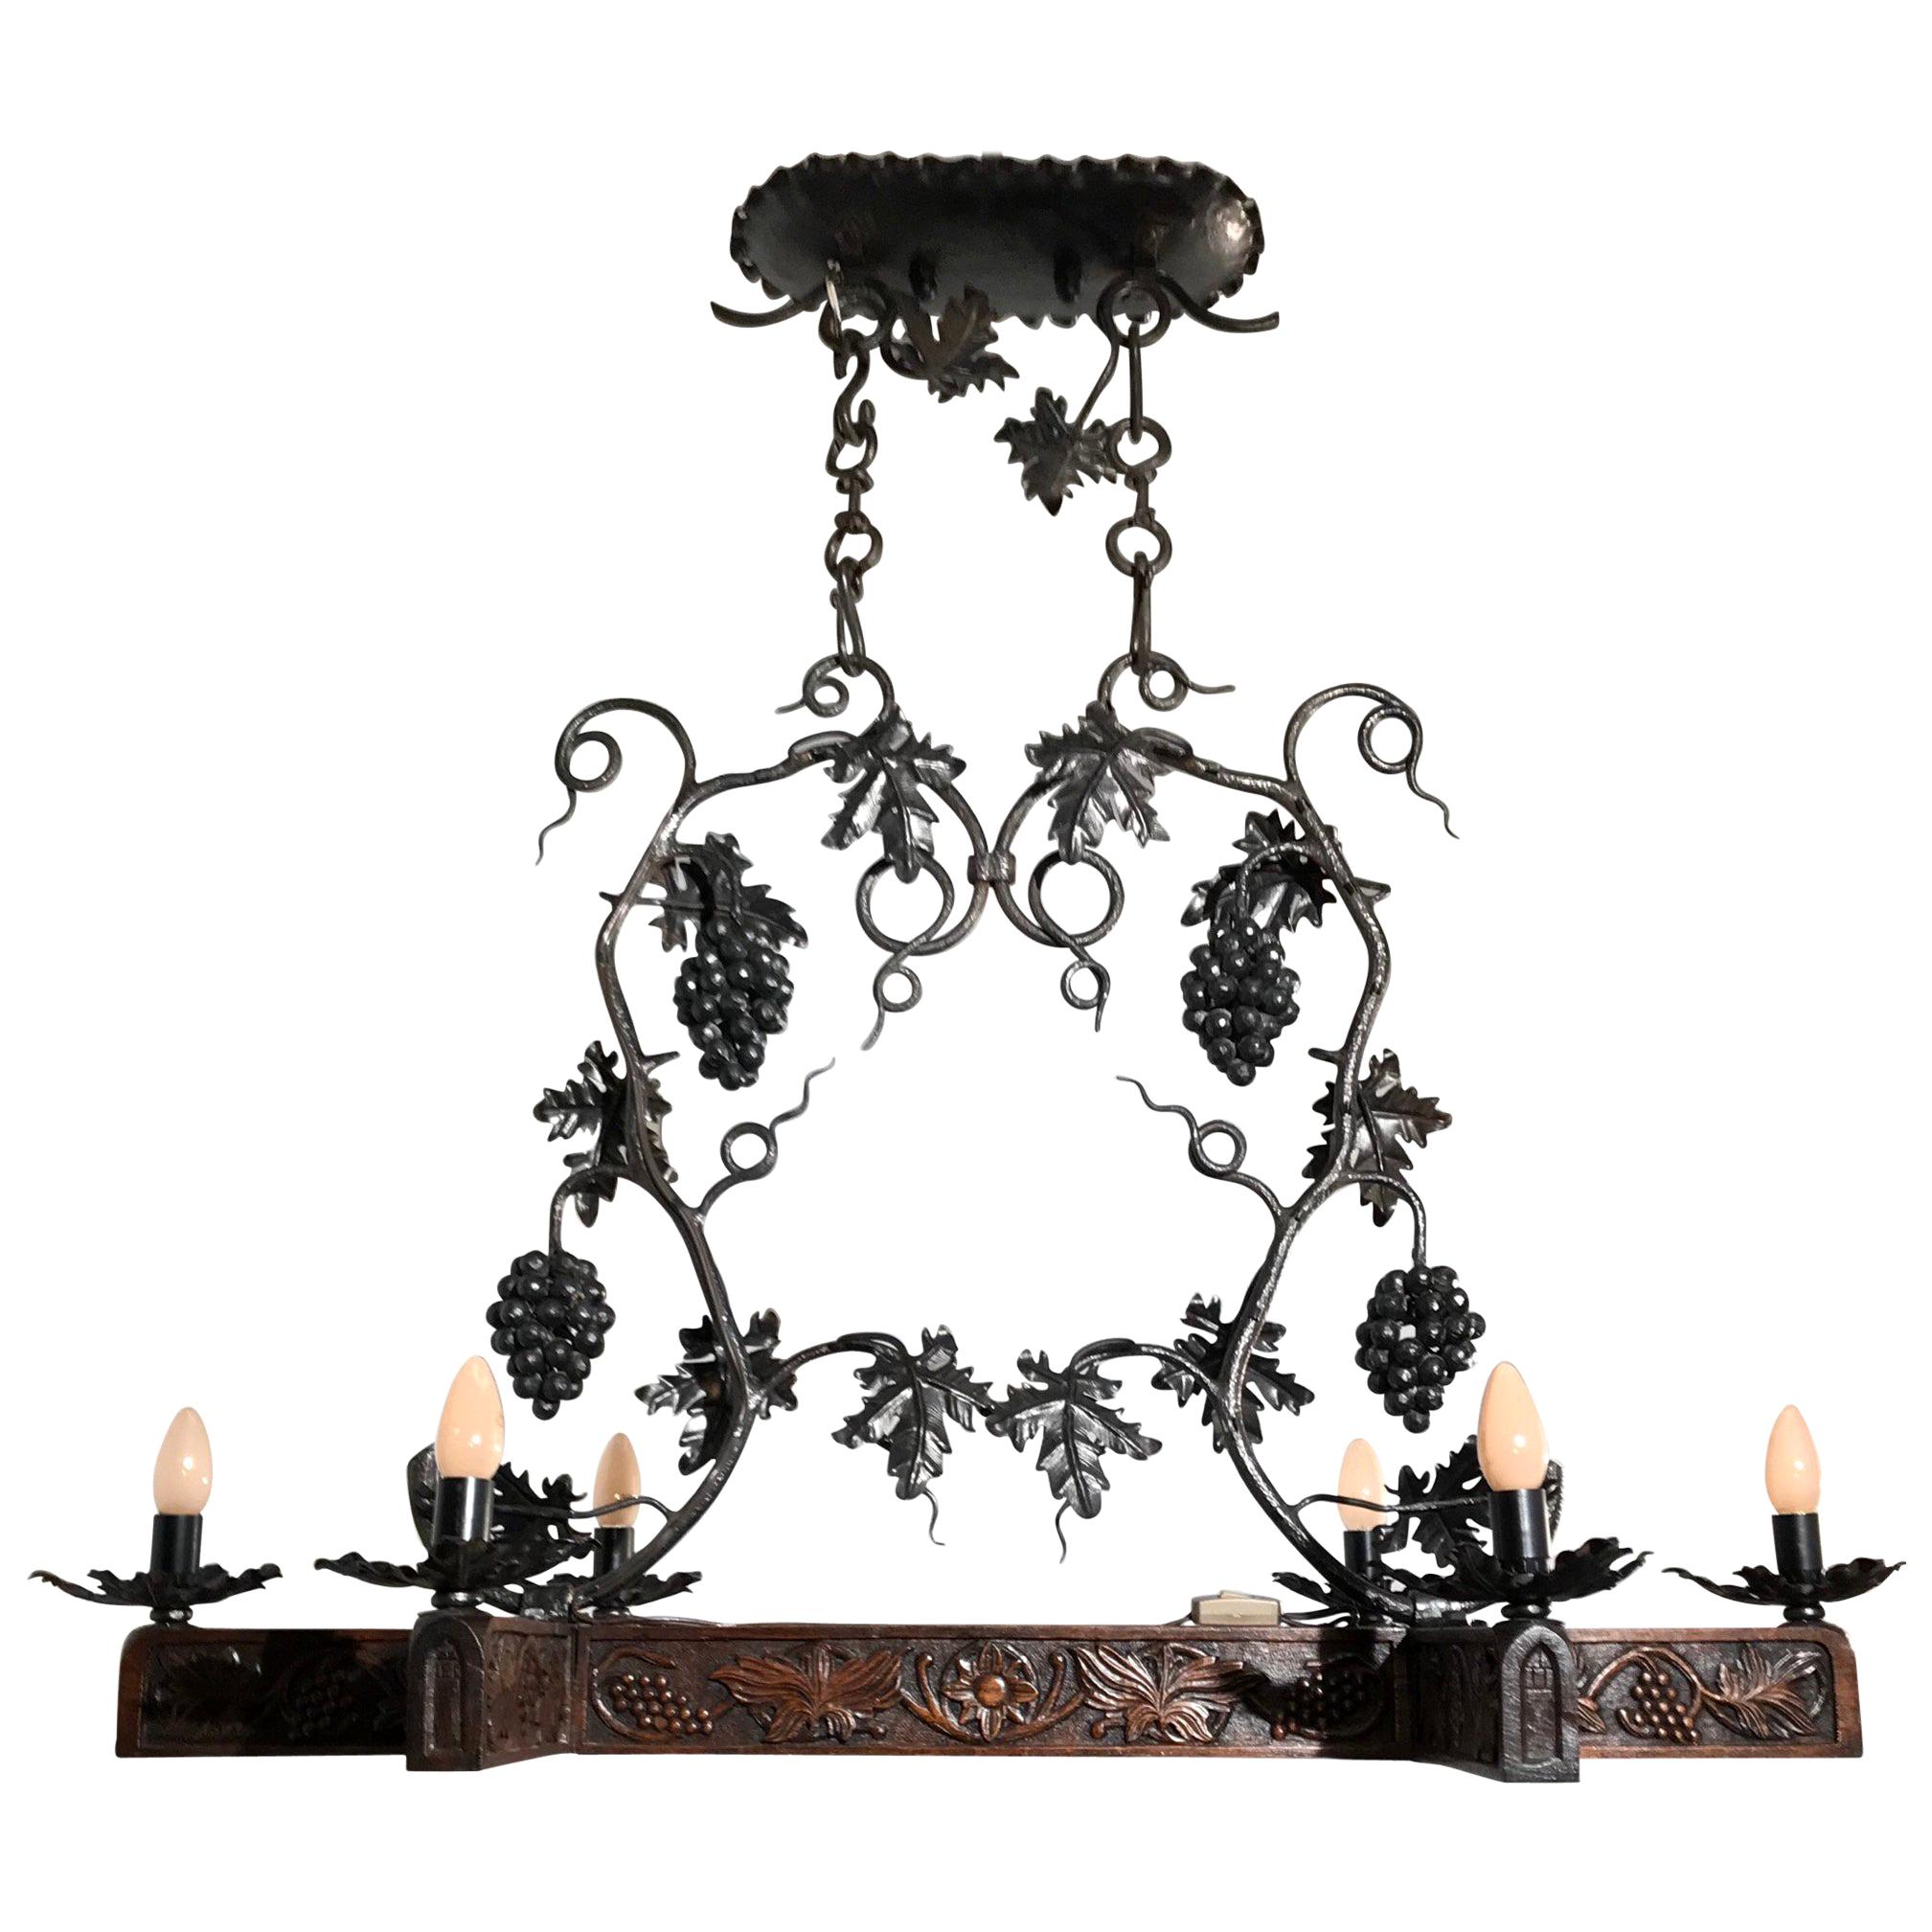 Stunning Horizontal Chandelier with Wrought Iron Grapes and Hand Carved Branches